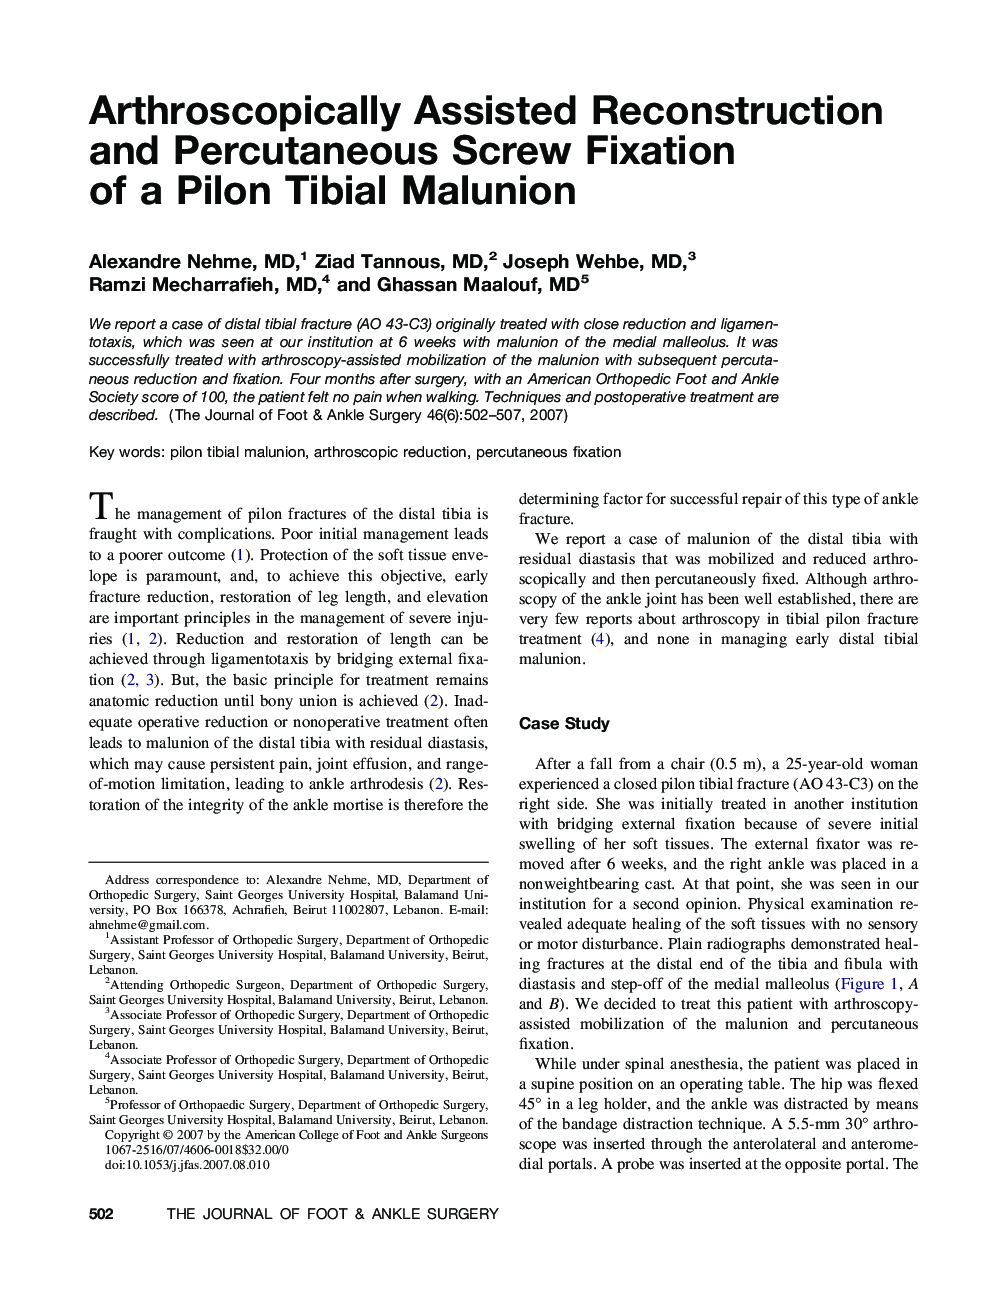 Arthroscopically Assisted Reconstruction and Percutaneous Screw Fixation of a Pilon Tibial Malunion